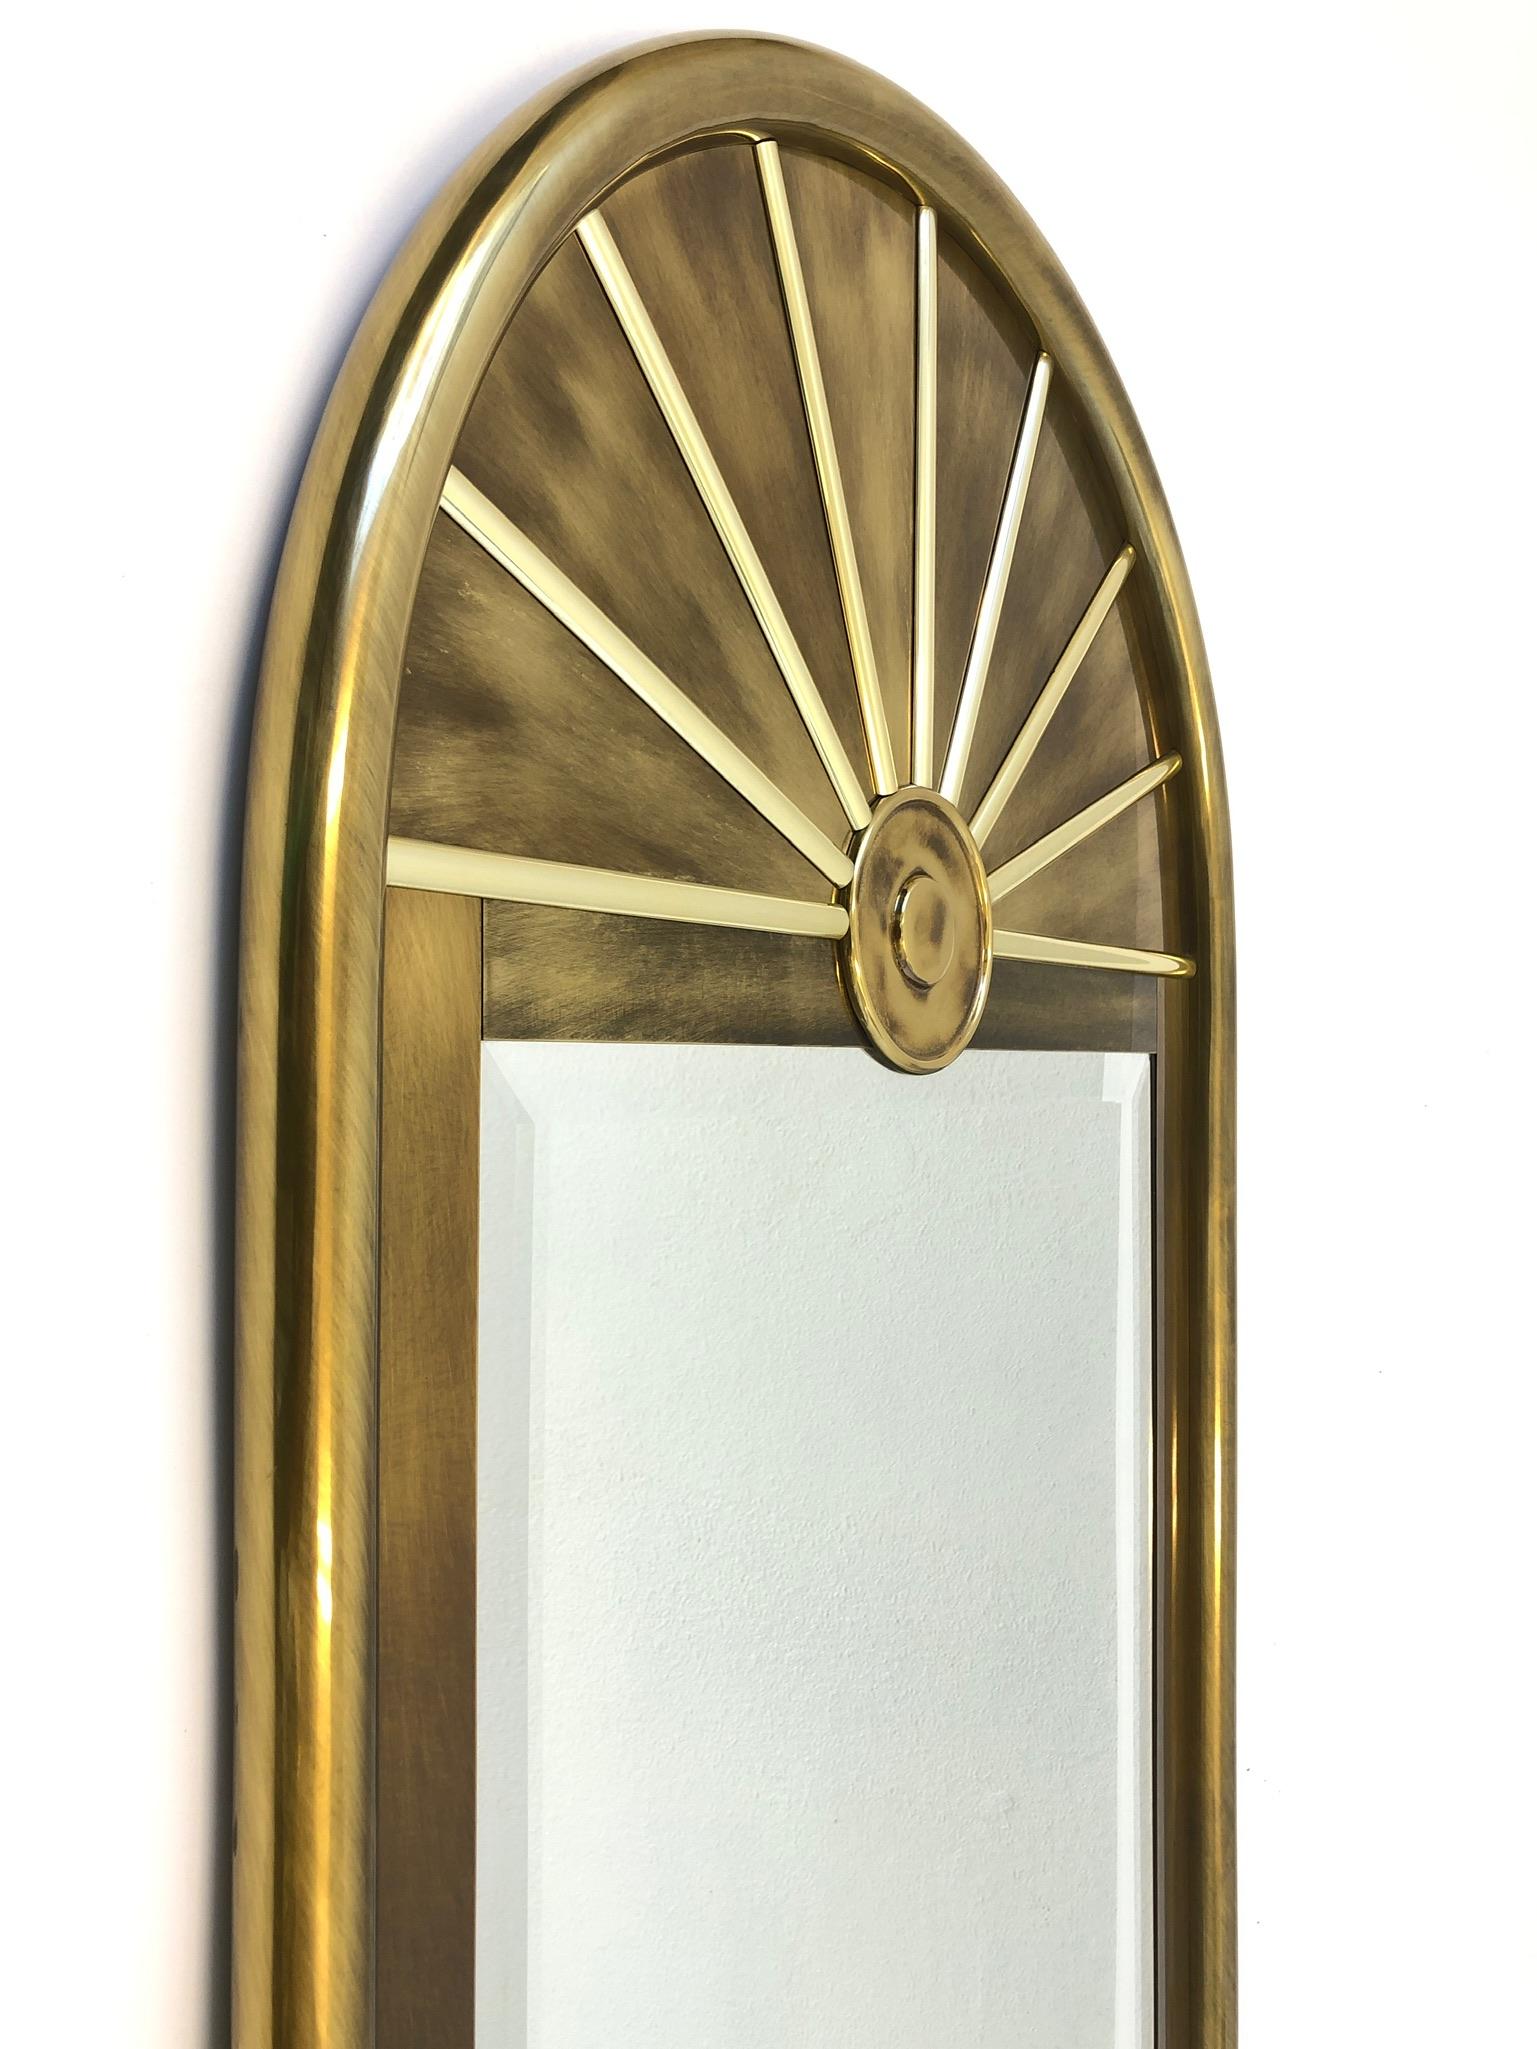 Beautiful 1970s aged brass beveled mirror by Mastercraft. 
The mirror is in original condition, so it shows minor wear consistent with age. 
Measurements: 56” high, 28” wide and 1.75” deep.